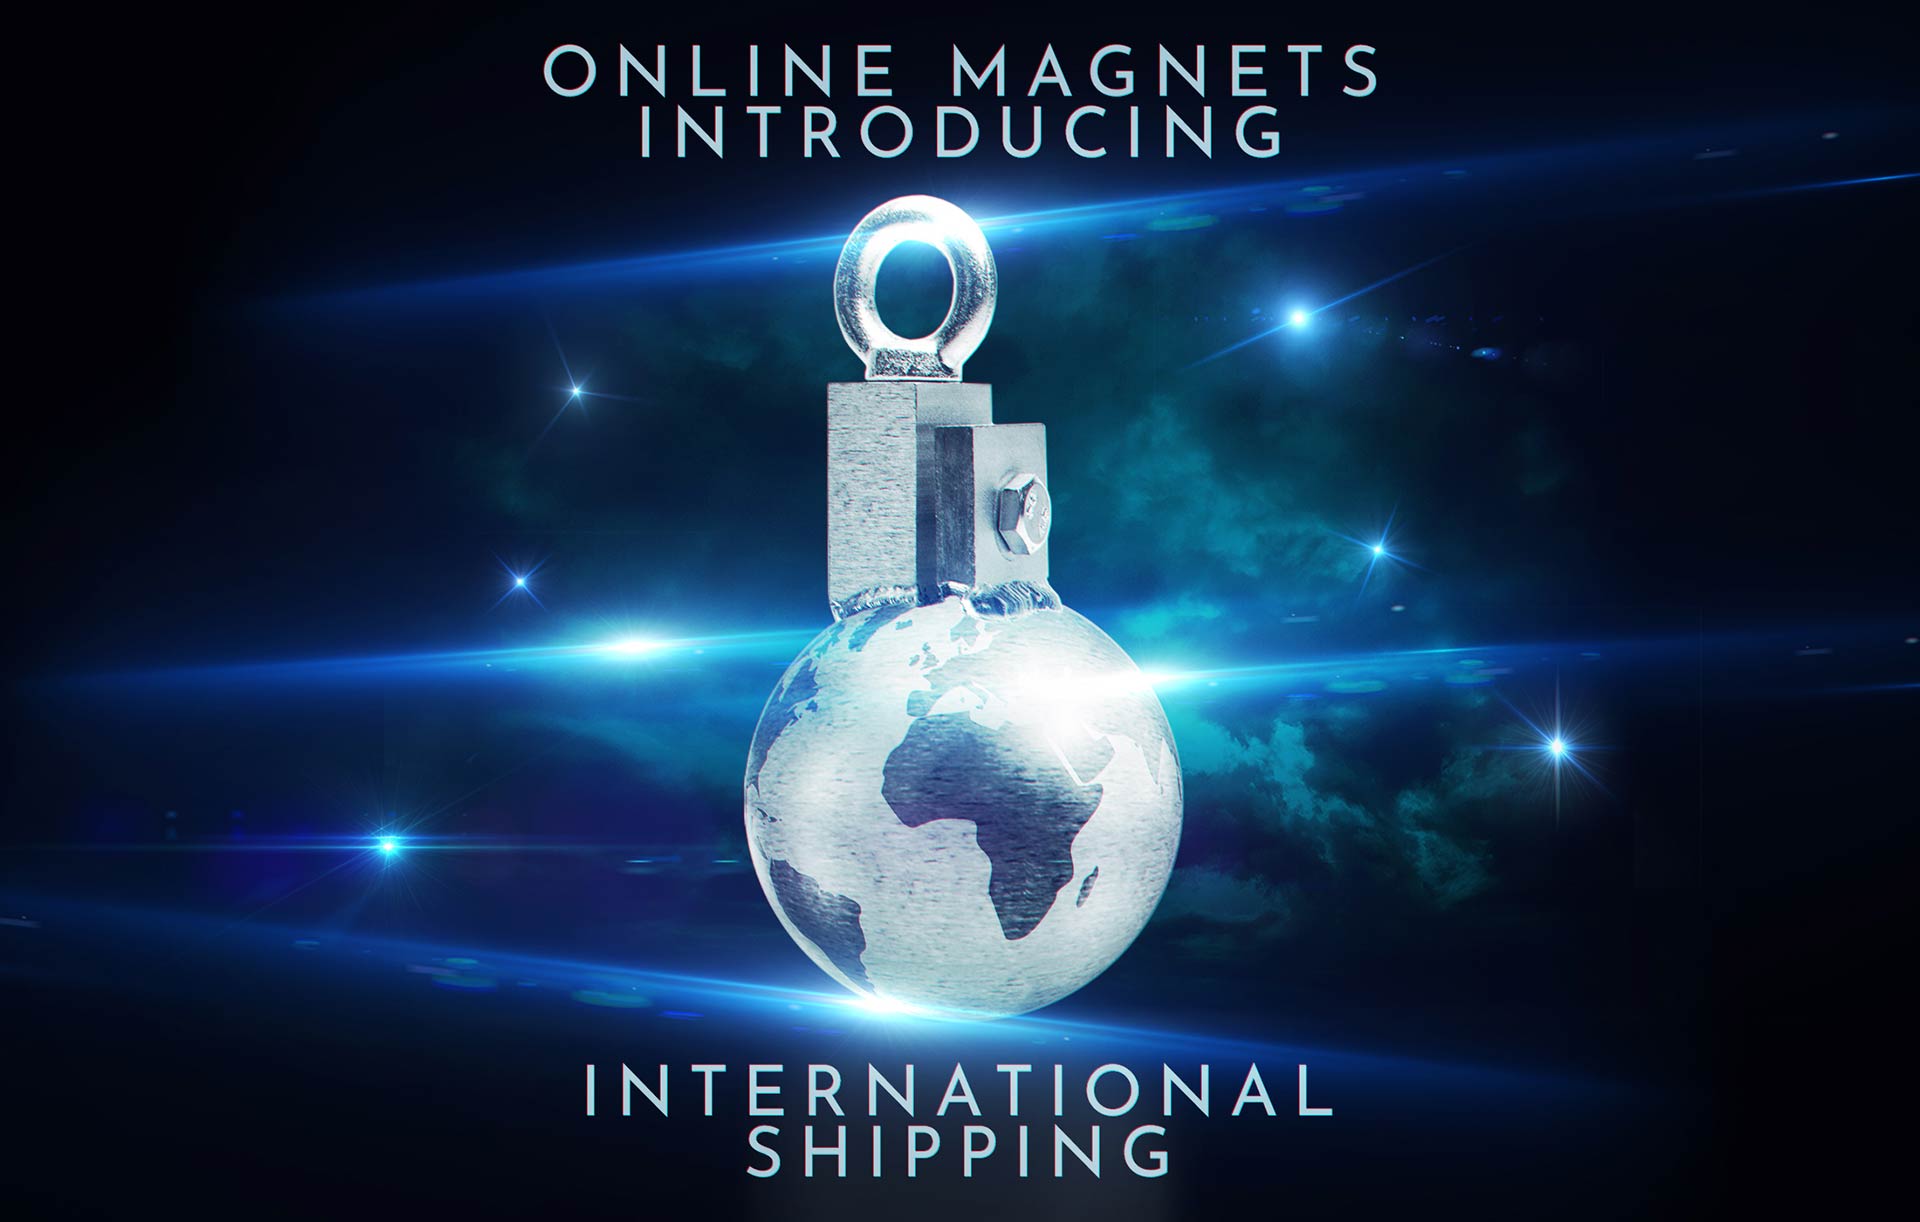 Online Magnets - International Shipping